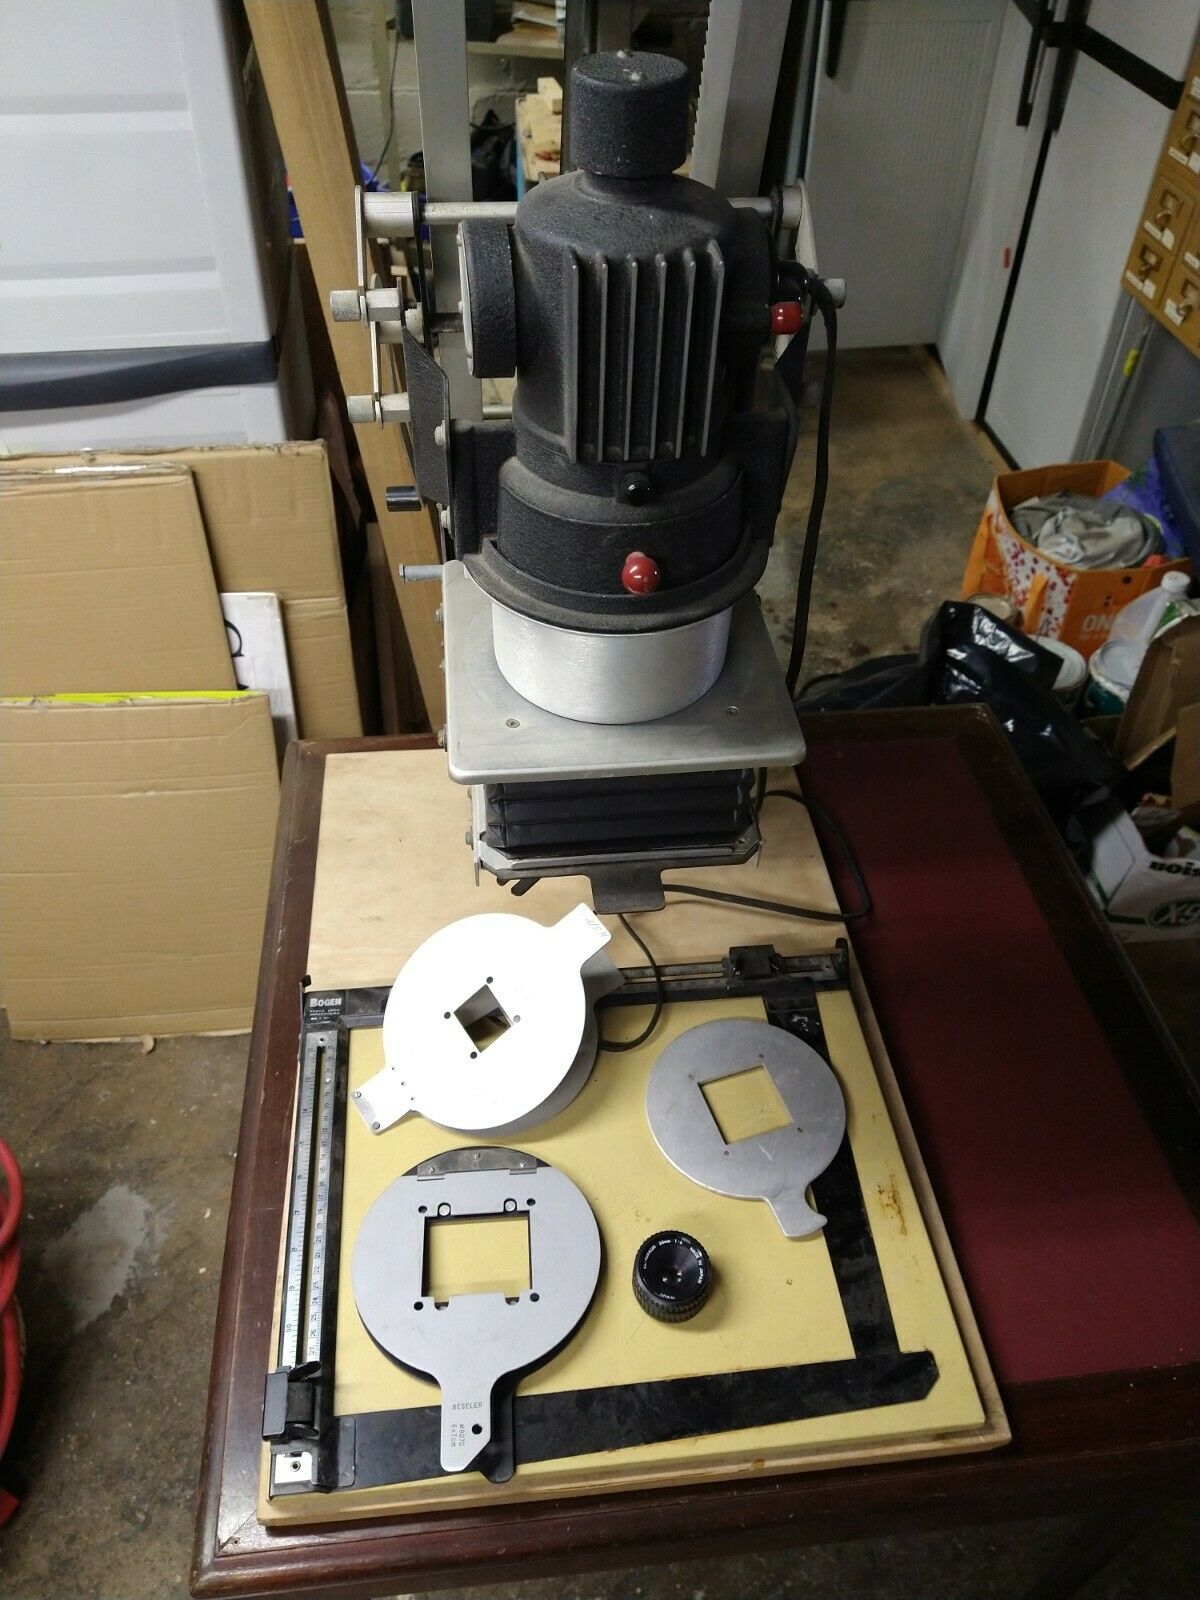 Simmon Omega B8 Vintage Photo Enlarger, Condenser Lamphouse Type B - Used